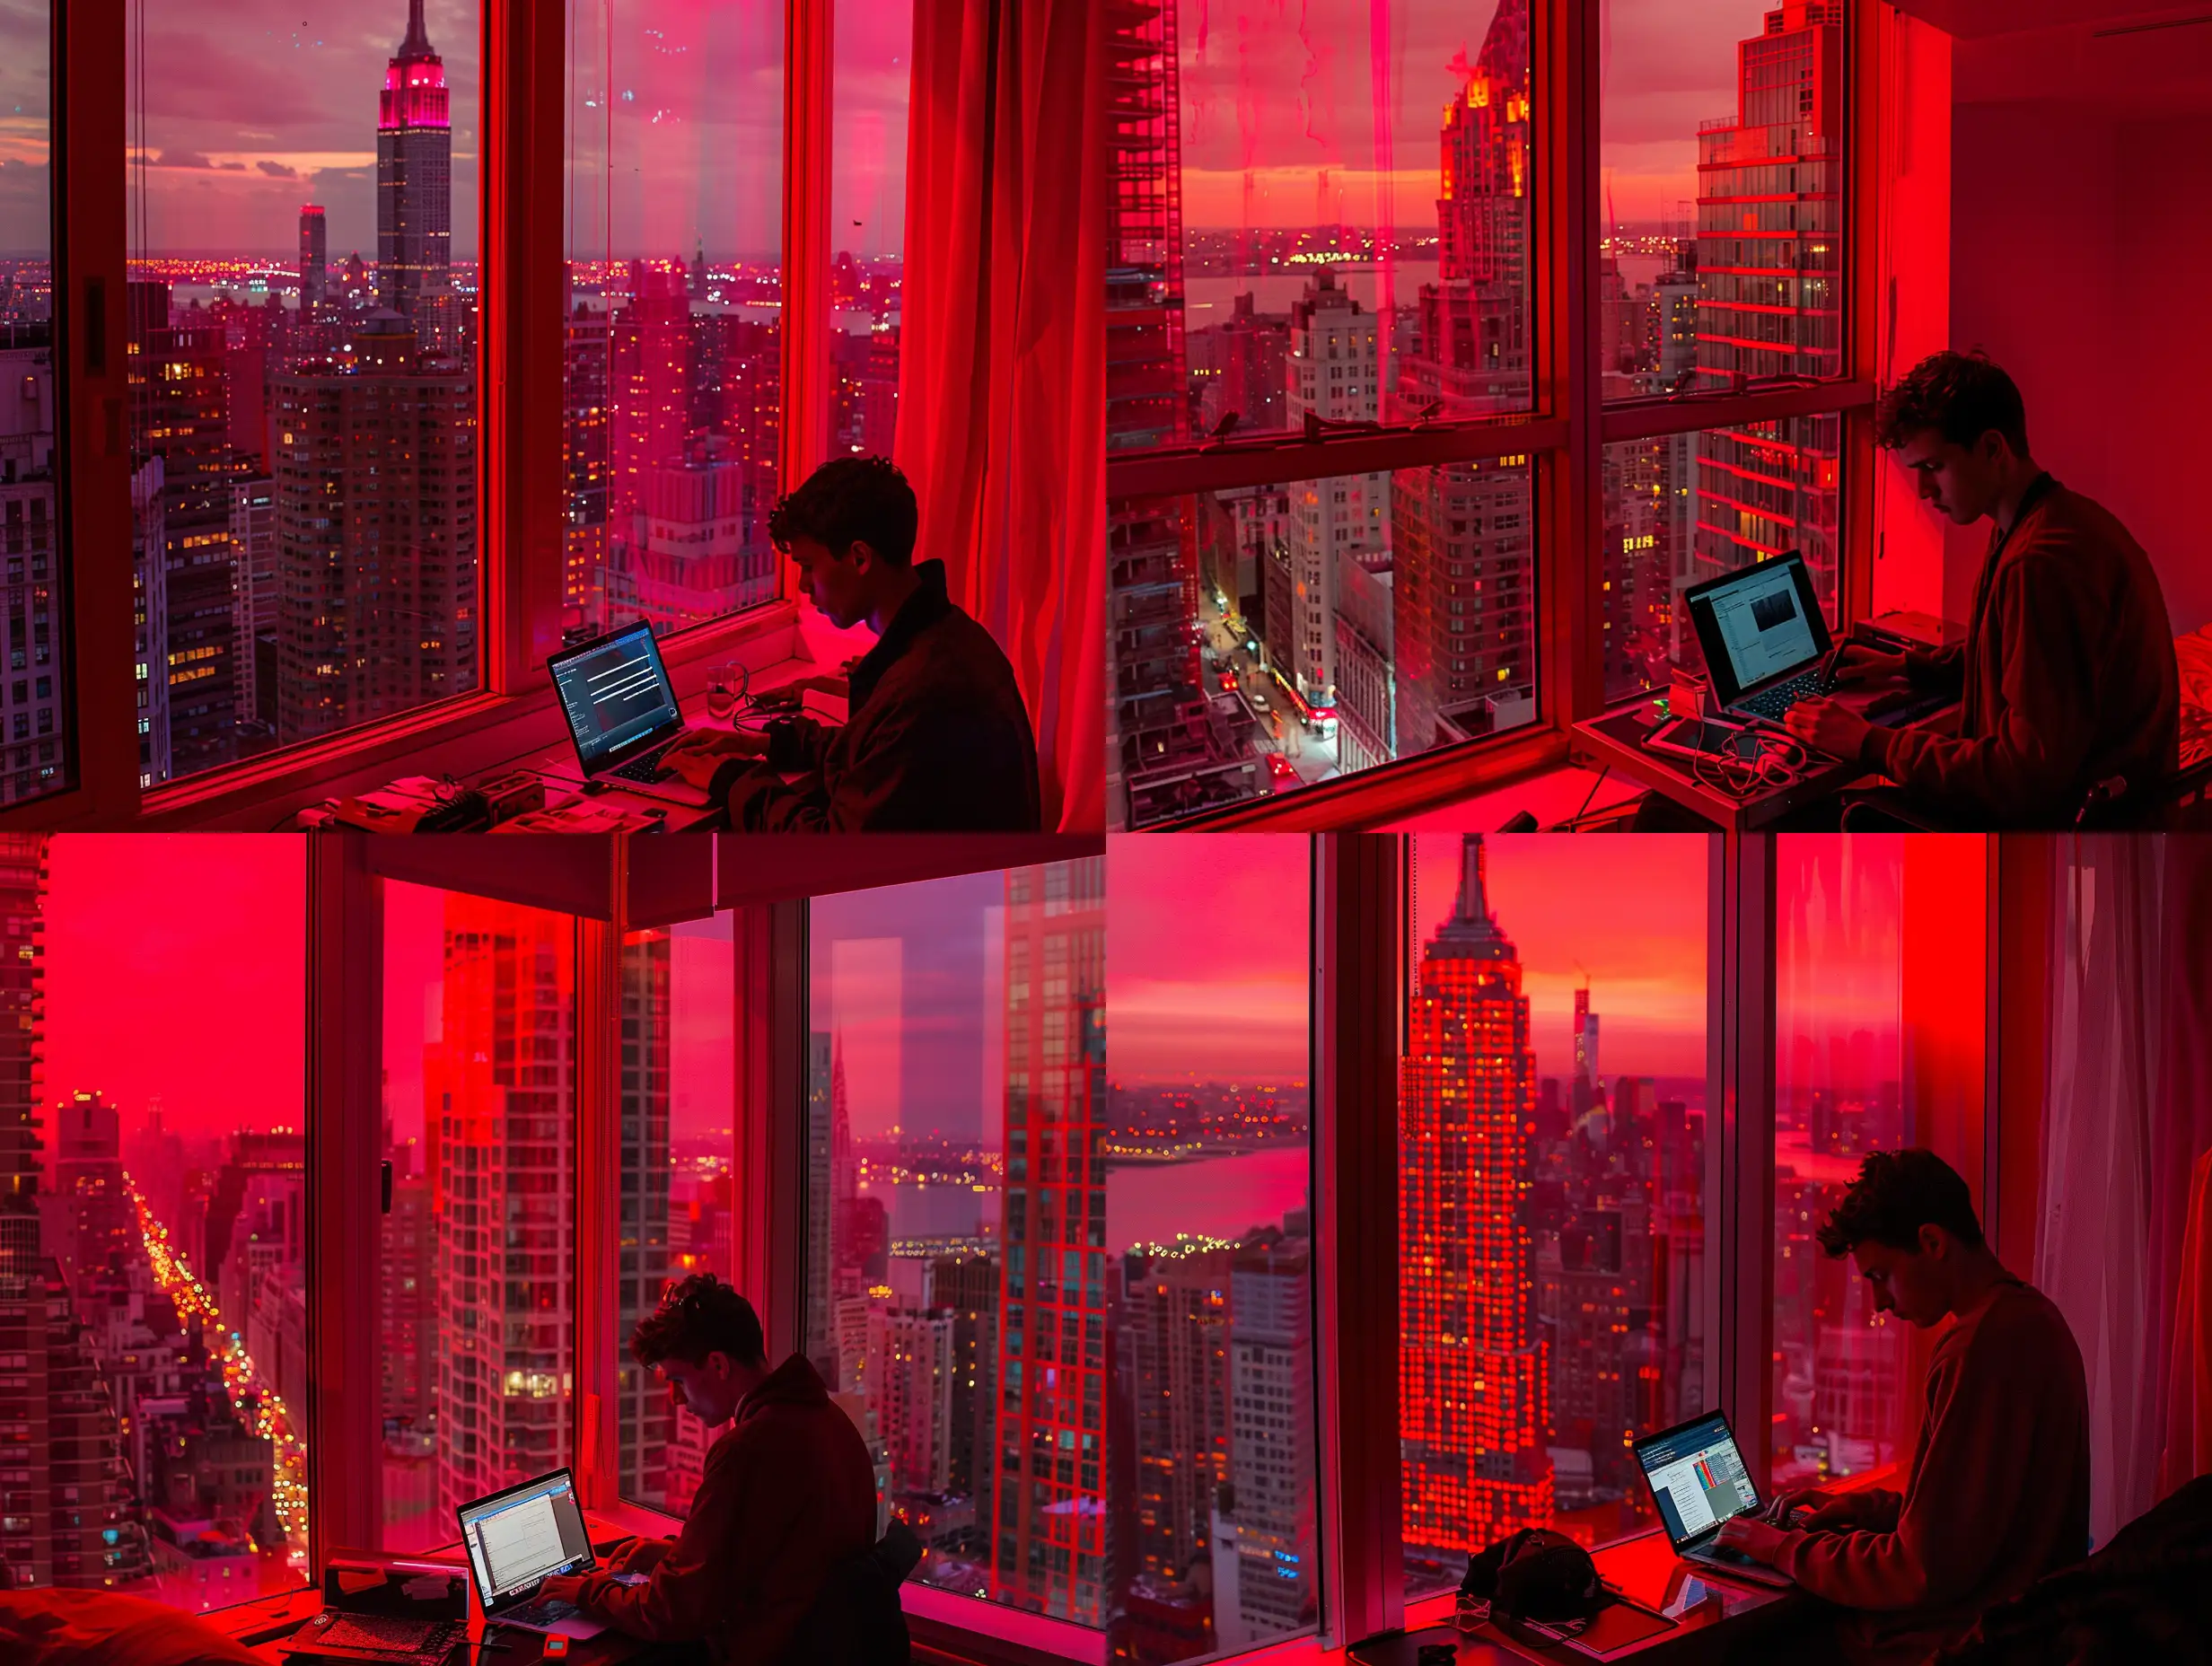 apartment with an incredible view, in the city of new york, the red colors of this scene transmits an aesthetic vibe,  theres a young man working in his laptop